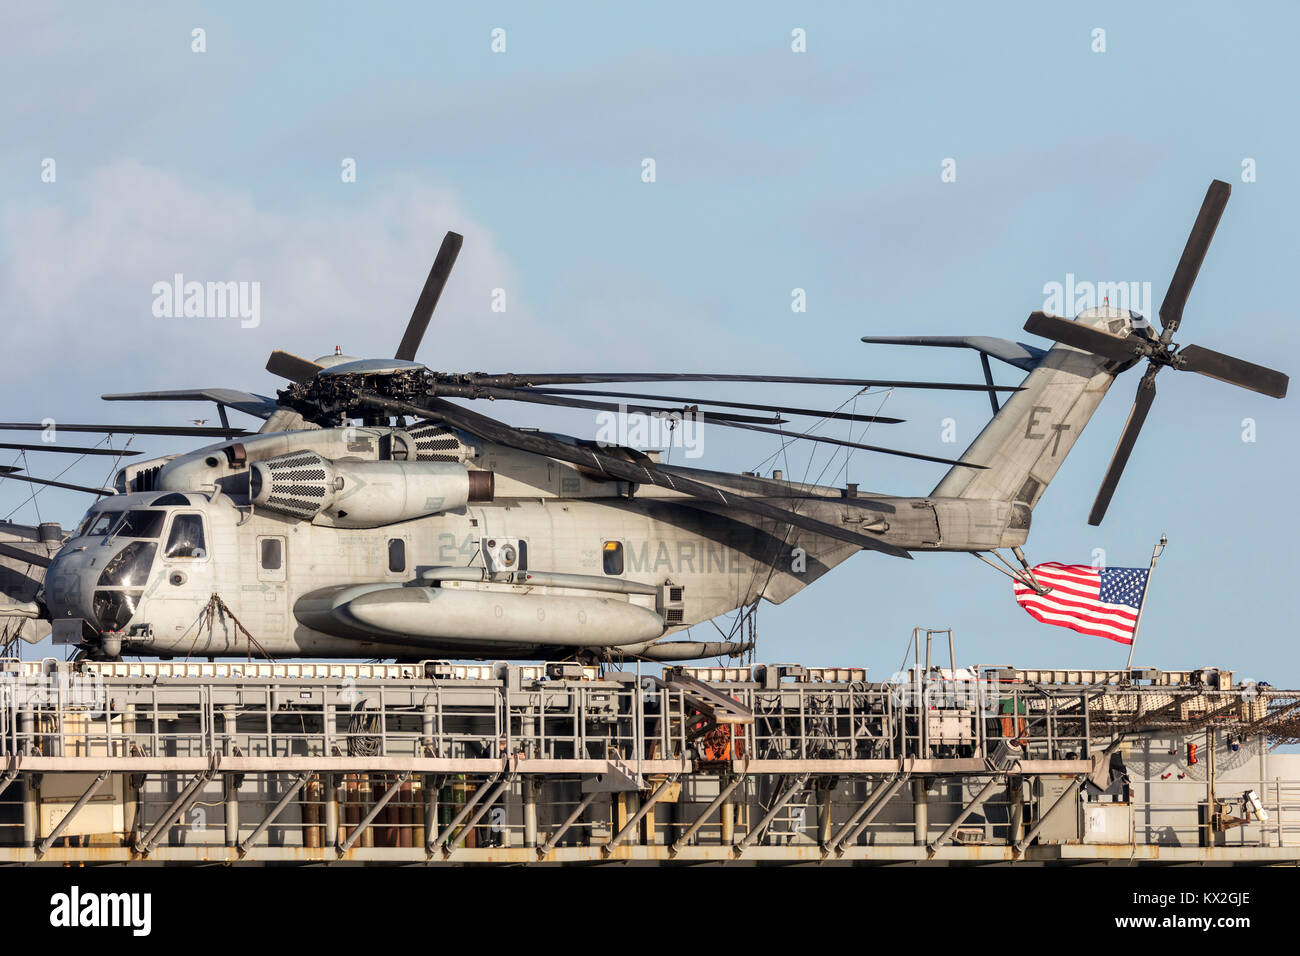 Sikorsky CH-53 heavy lift transport helicopters from the United States Marine Corps (Marine Expeditionary Unit Stock Photo